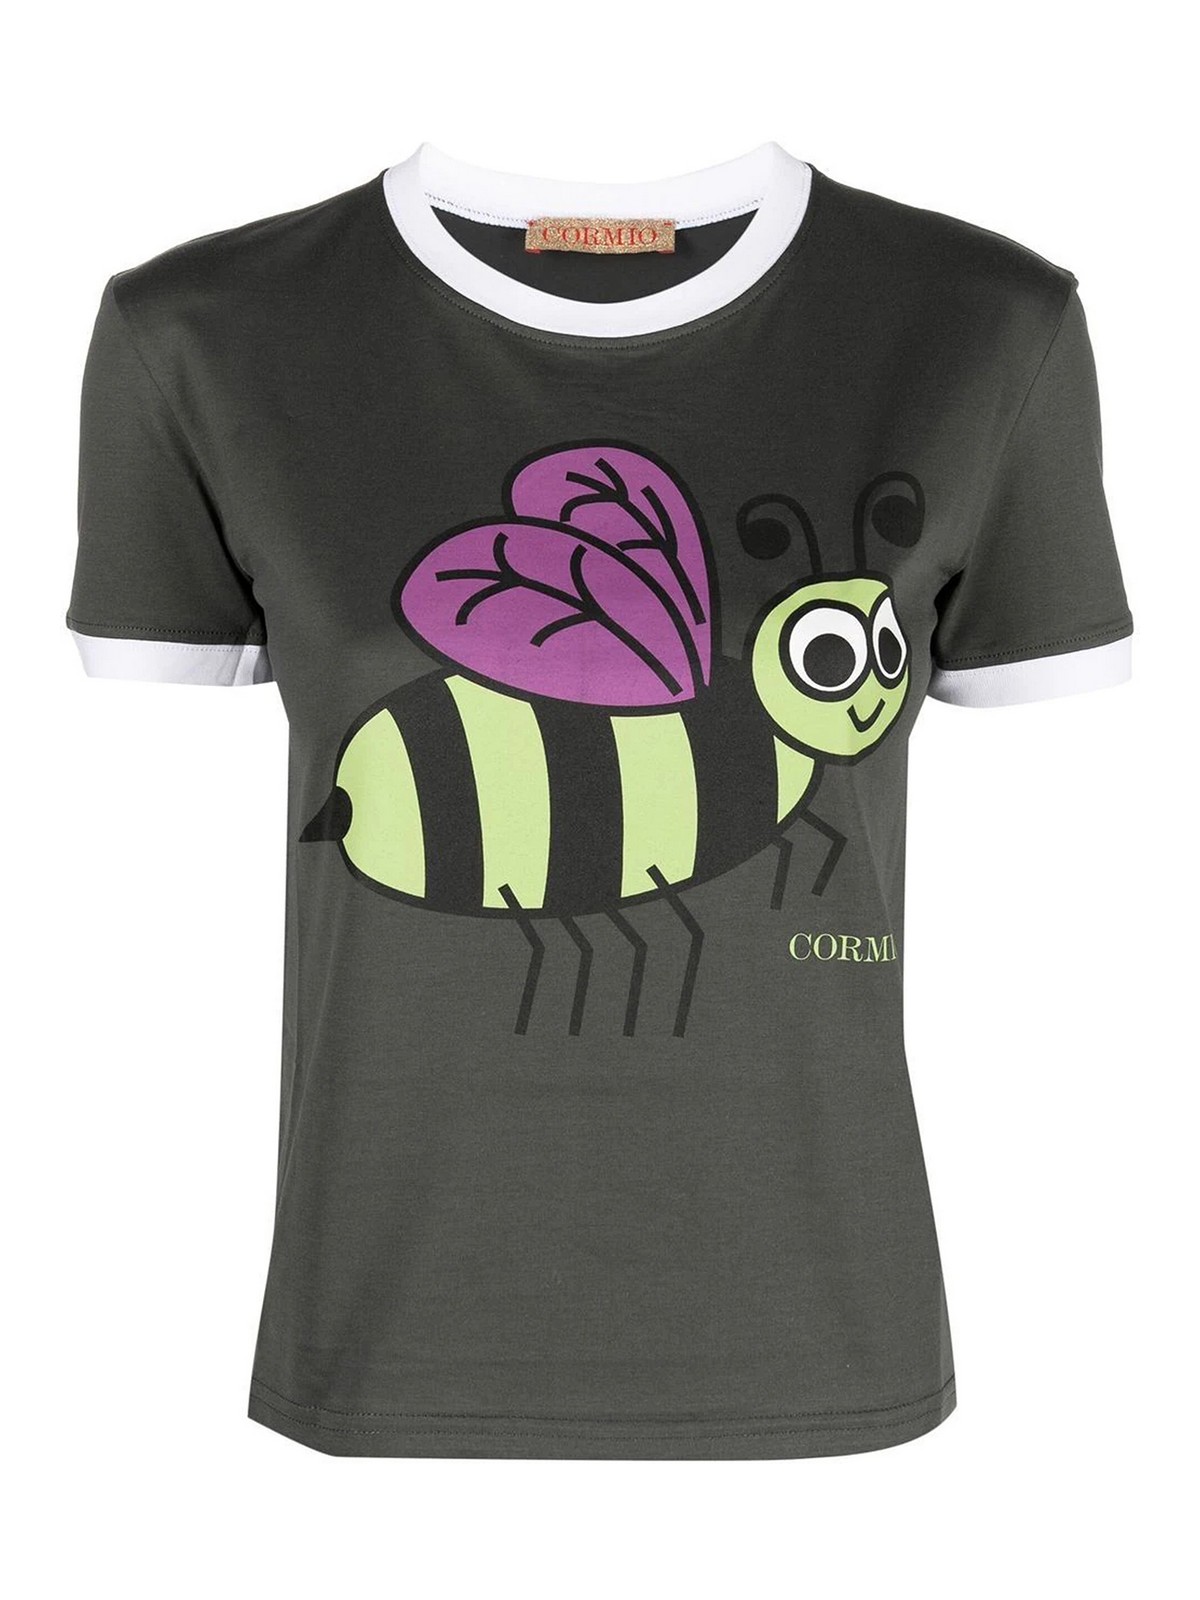 CORMIO BUSY AS A BEE' T-SHIRT